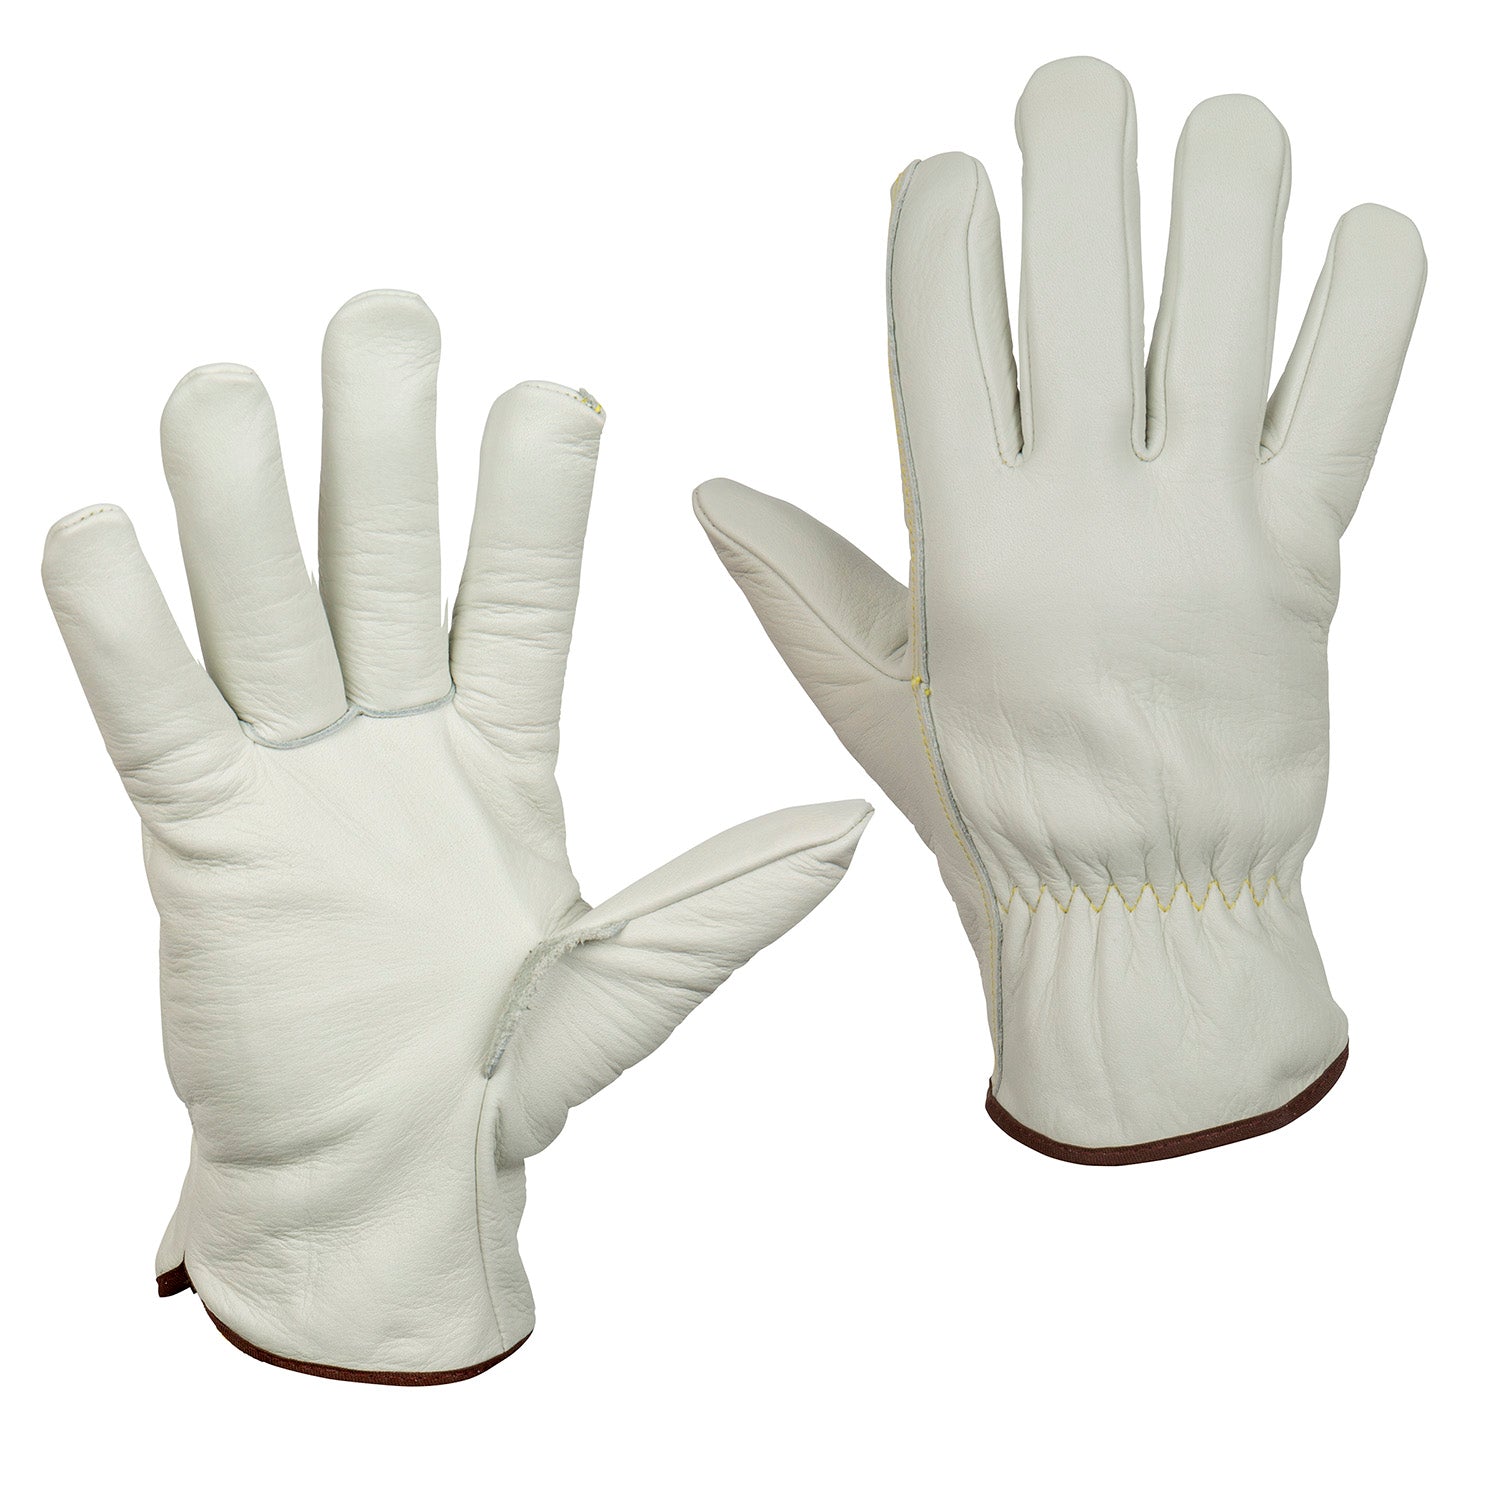 Tillman 1422 Top Grain Cowhide Drivers Gloves front and back